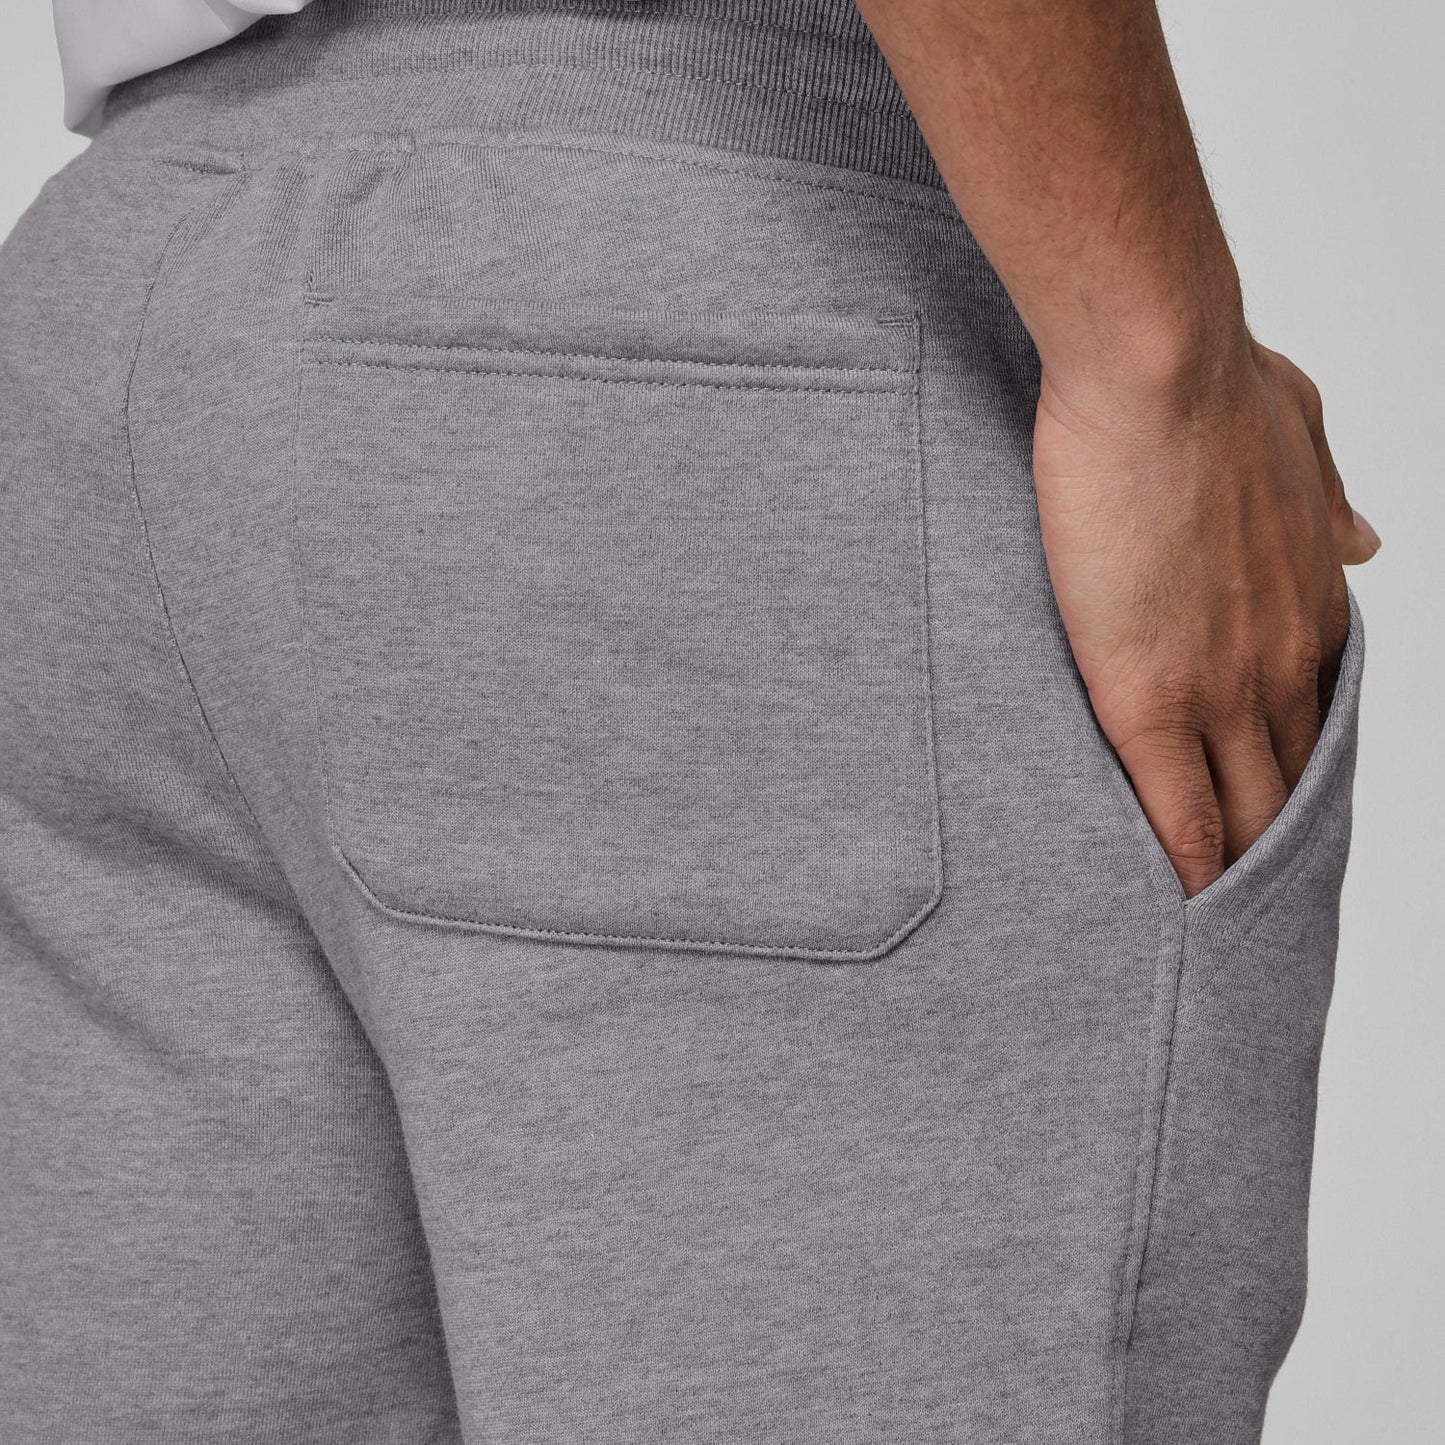 Heather Gray Fleece French Terry Shorts